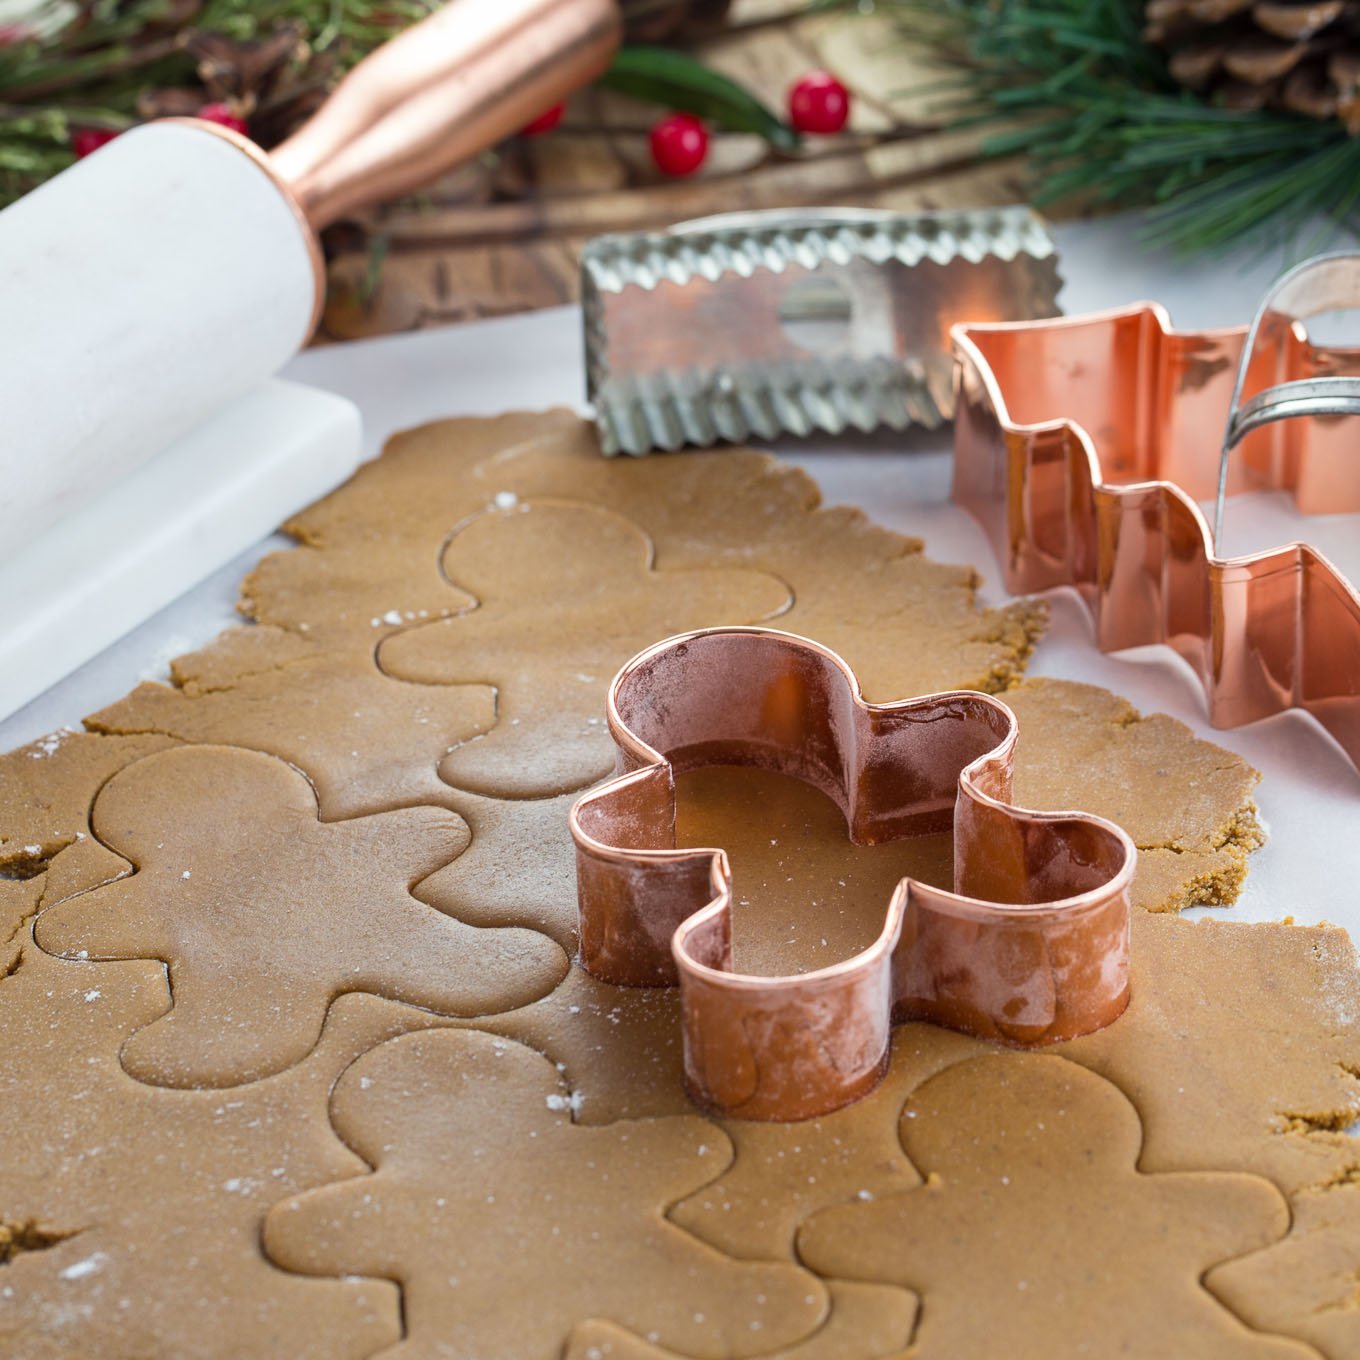 Rolled out gingerbread dough with copper cookie cutter cutting out shapes.